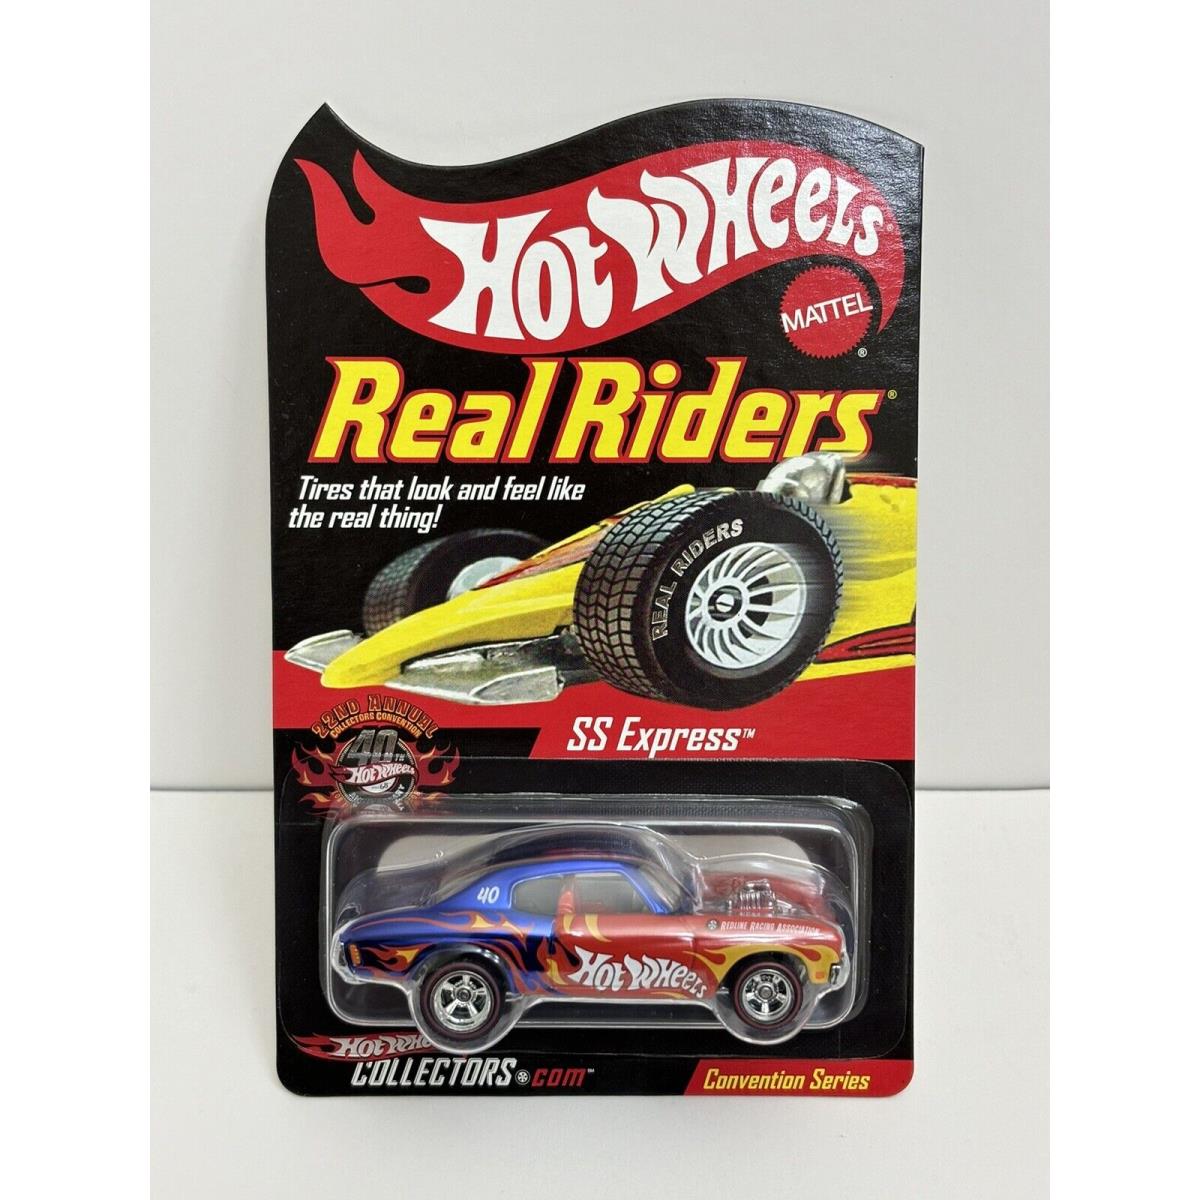 2008 Hot Wheel Rlc Real Riders 22nd Annual Convention Series SS Express 5913/10k